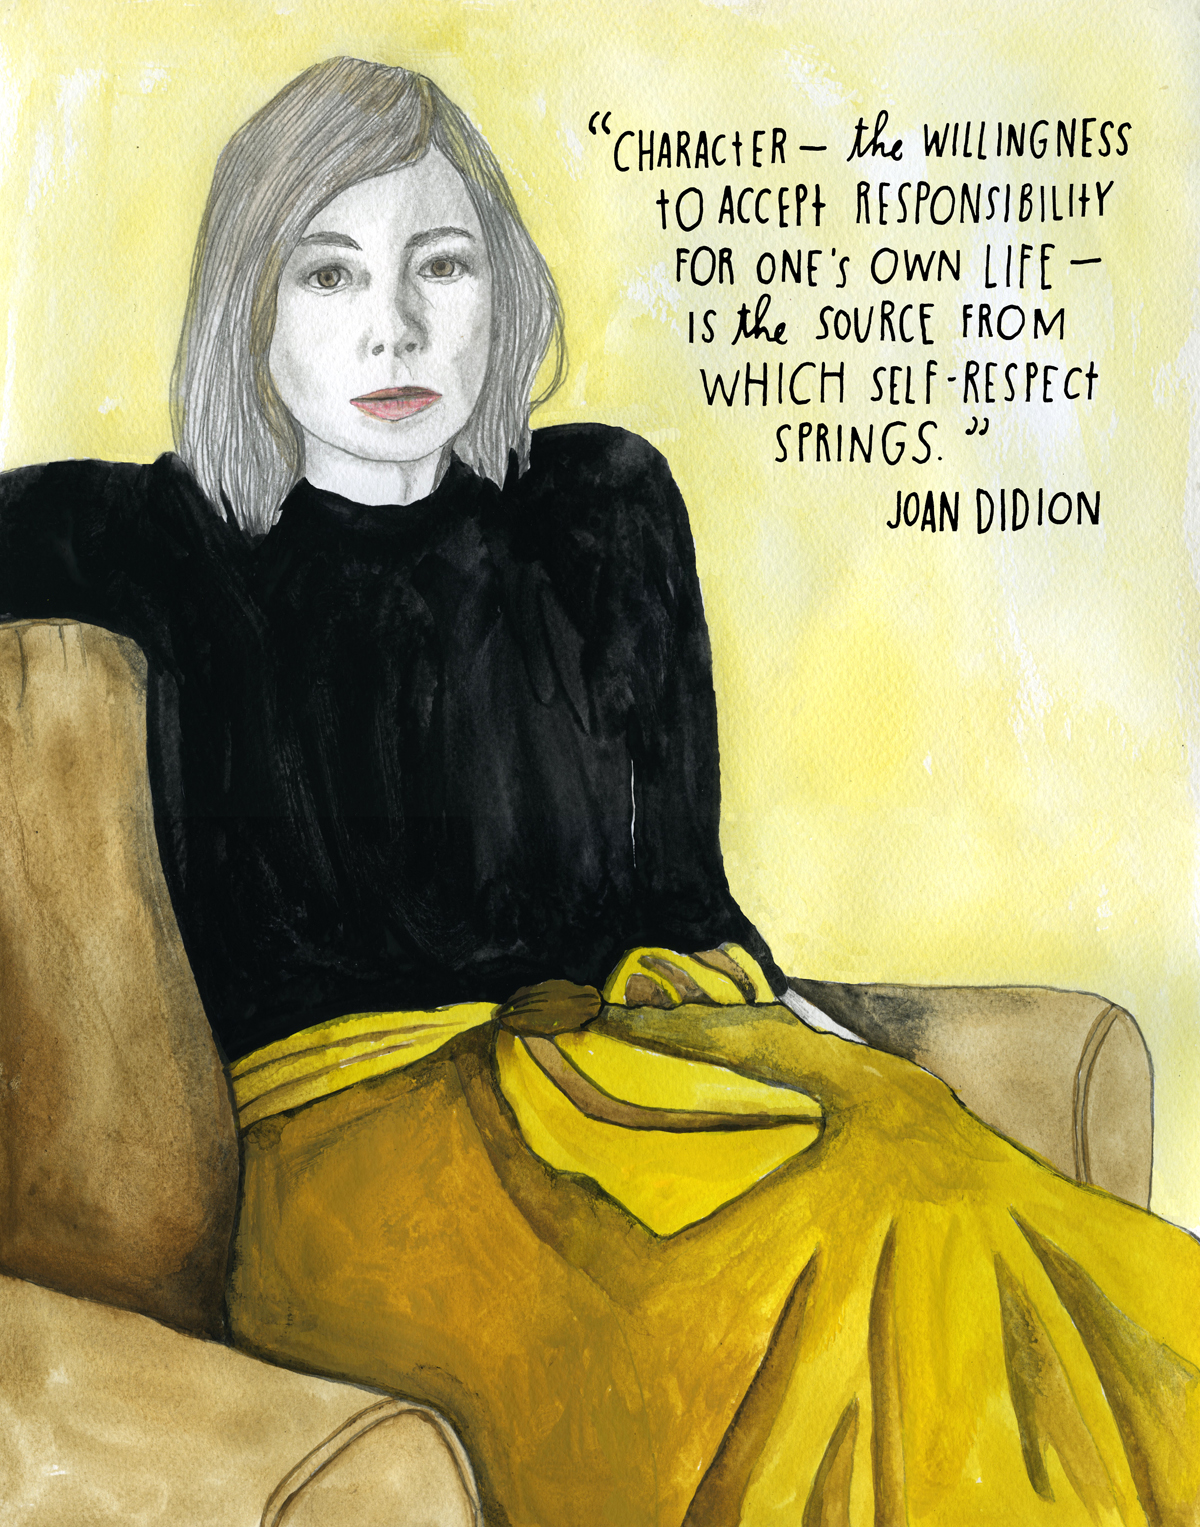 Joan Didion's quote #5